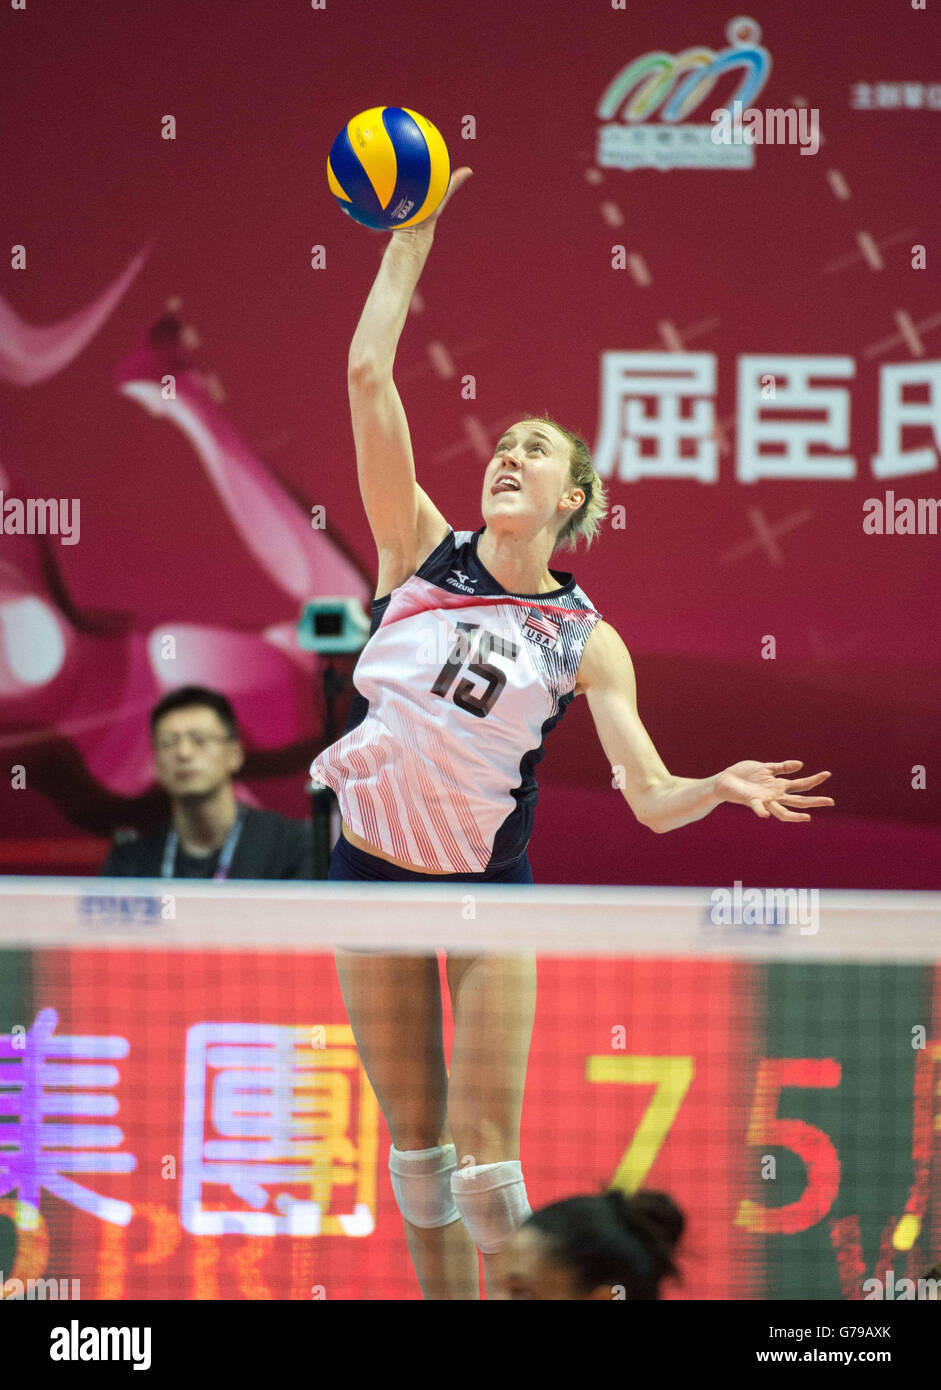 Hong Kong, Hong Kong S.A.R, China. 26th June, 2016. KIMBERLY HILL of the USA serves for her team.FIVB Volleyball World Grand Prix Hong Kong 2016. USA secure a 3-0 win over China at the Hong Kong Coliseum with scores of 25-19, 25-21, 25-17 © Jayne Russell/ZUMA Wire/Alamy Live News Stock Photo